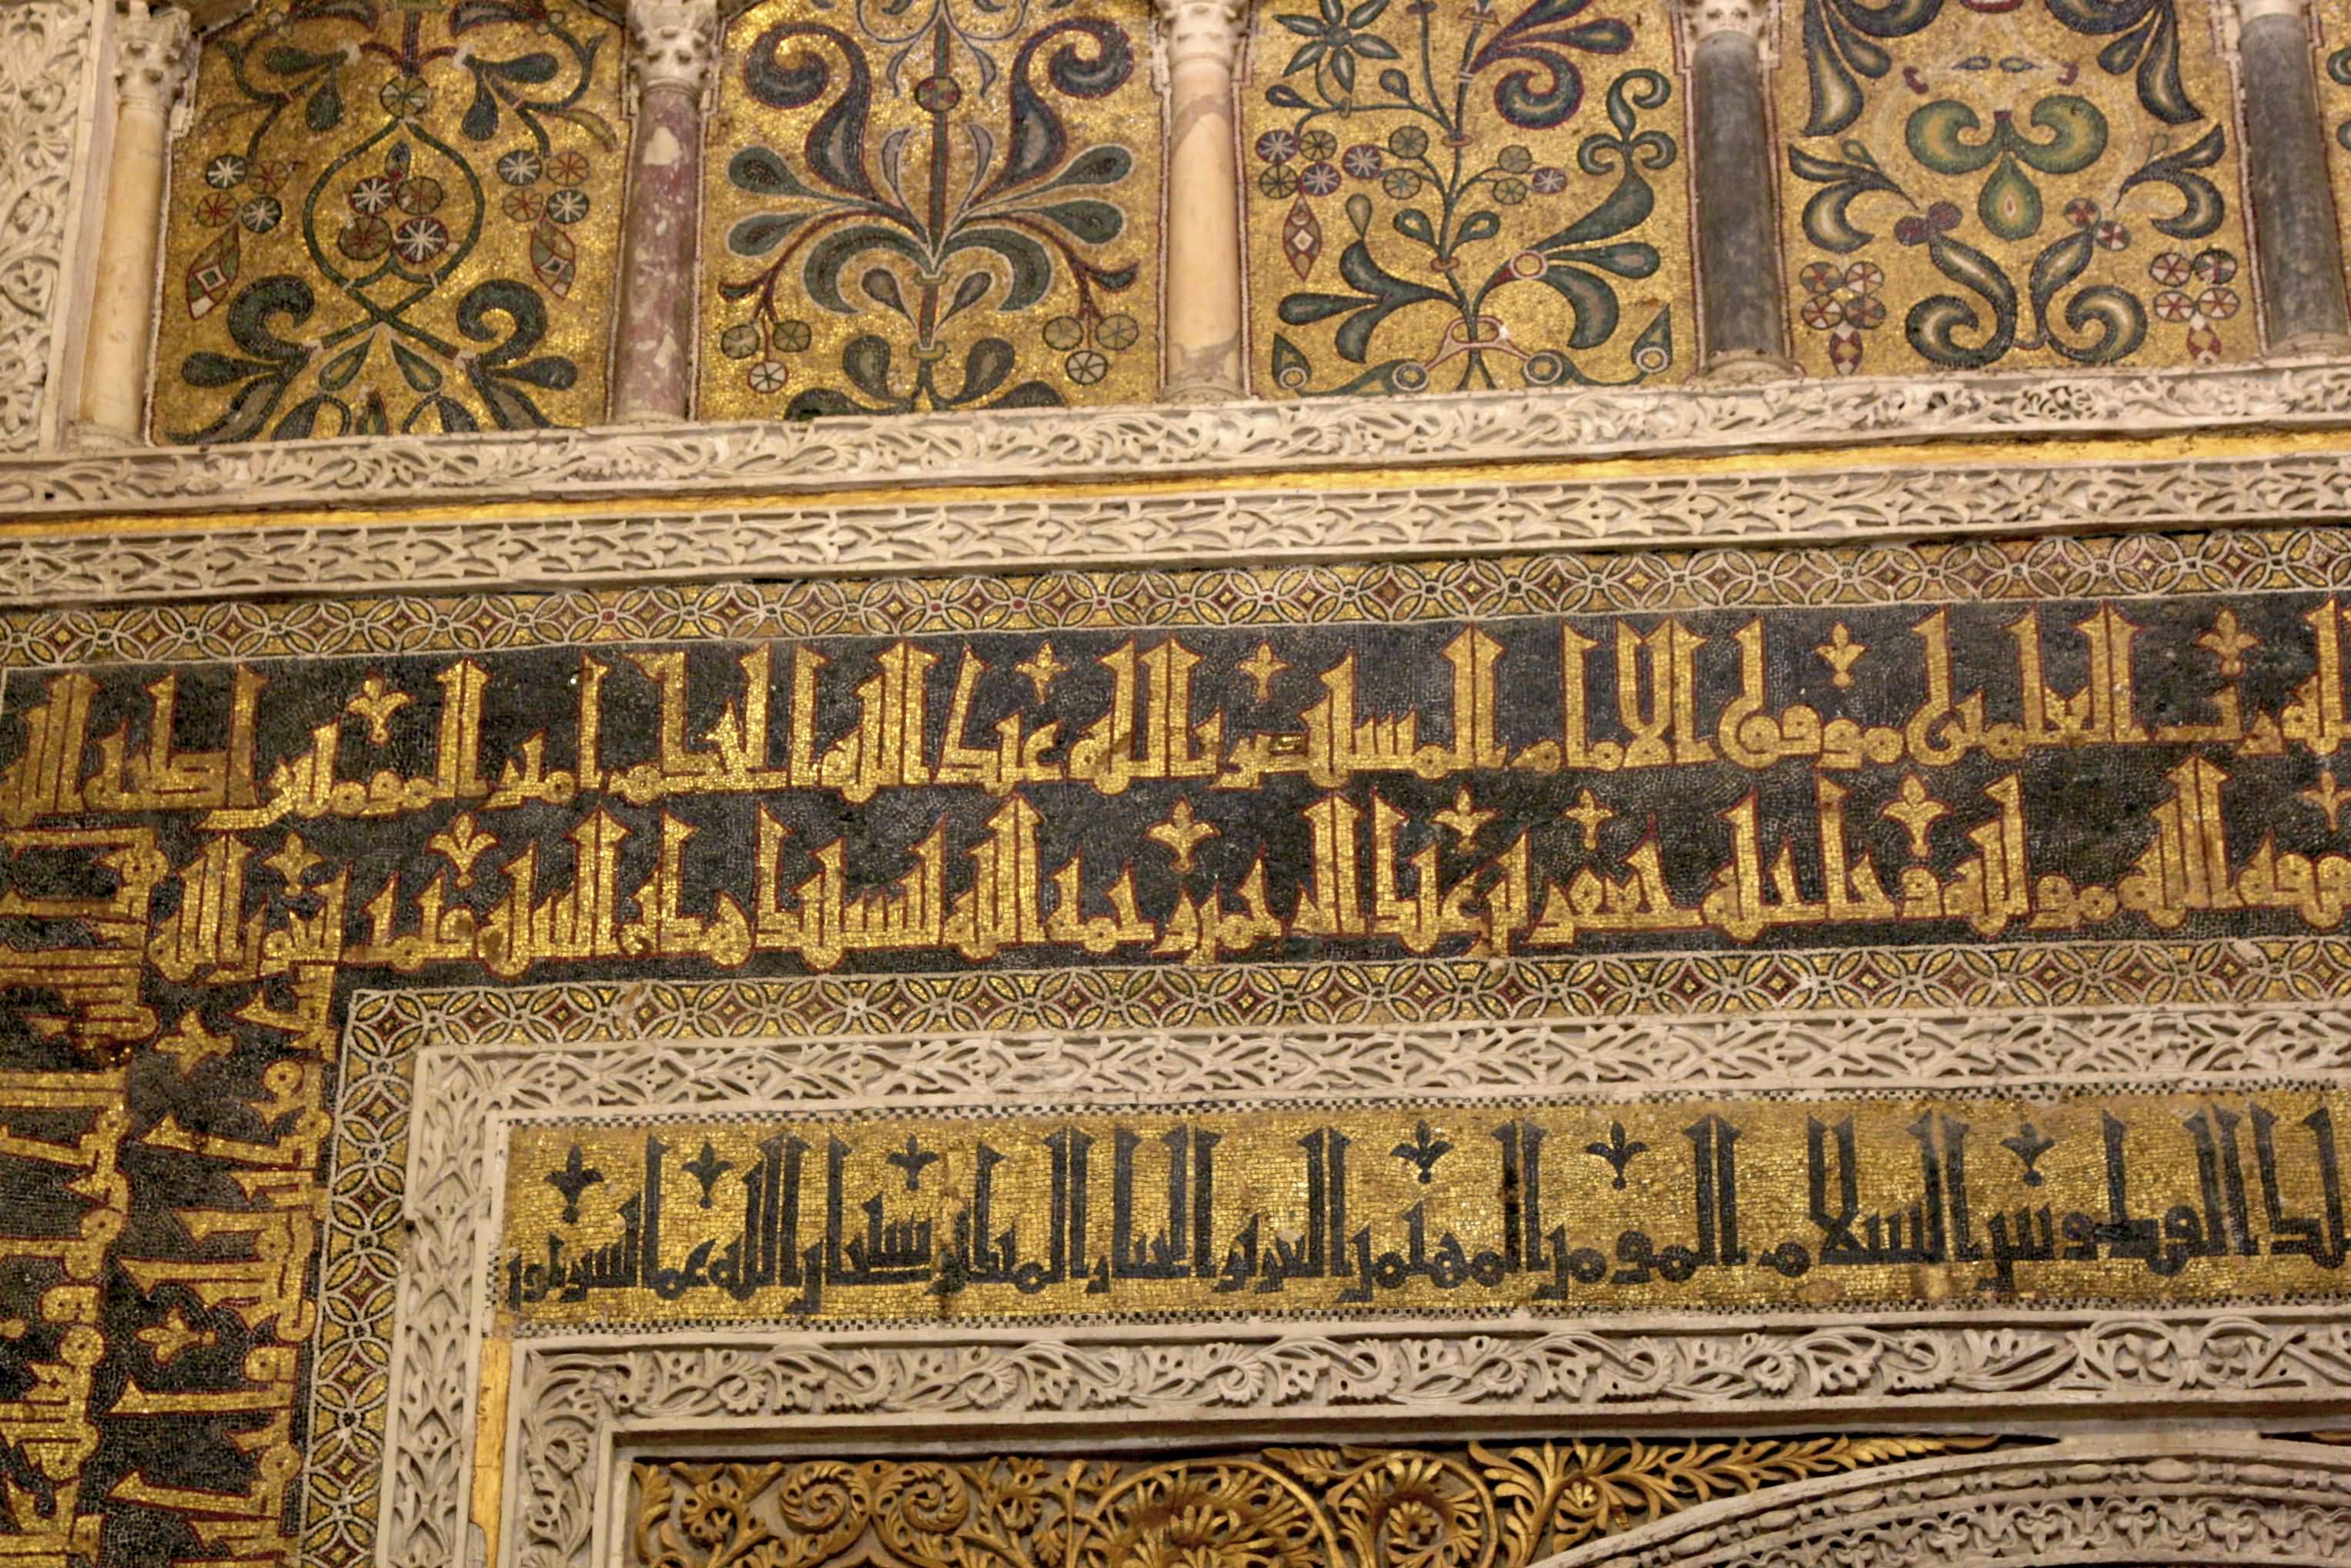 The Islamic architecture on the walls of mosque of Cordoba